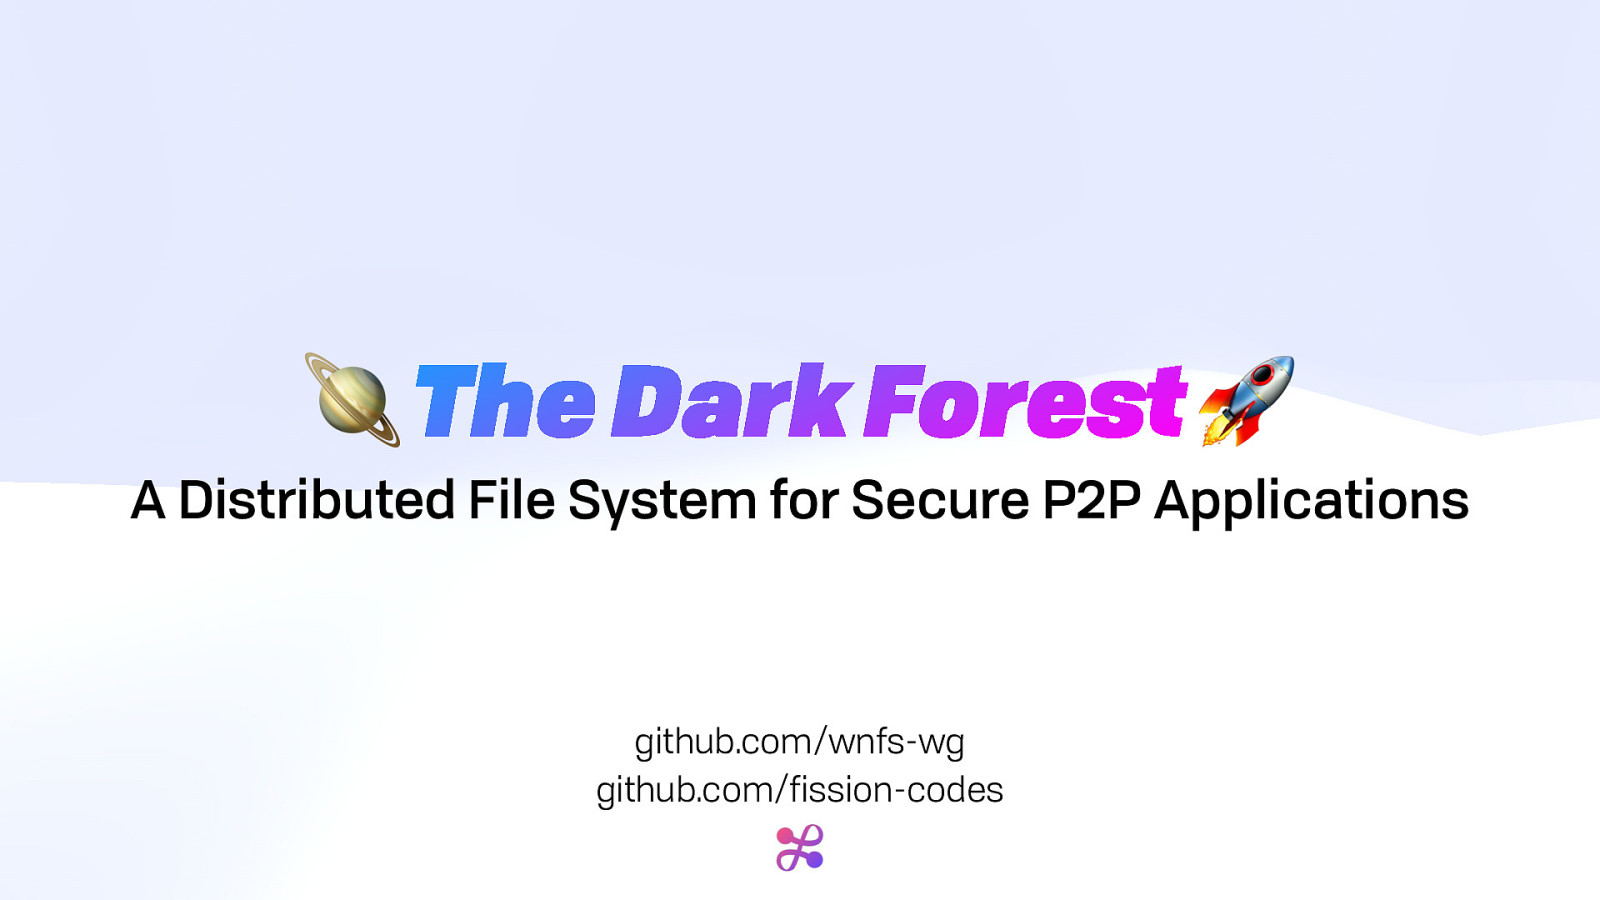 The Dark Forest: A Distributed File System for P2P Applications by Brooklyn Zelenka